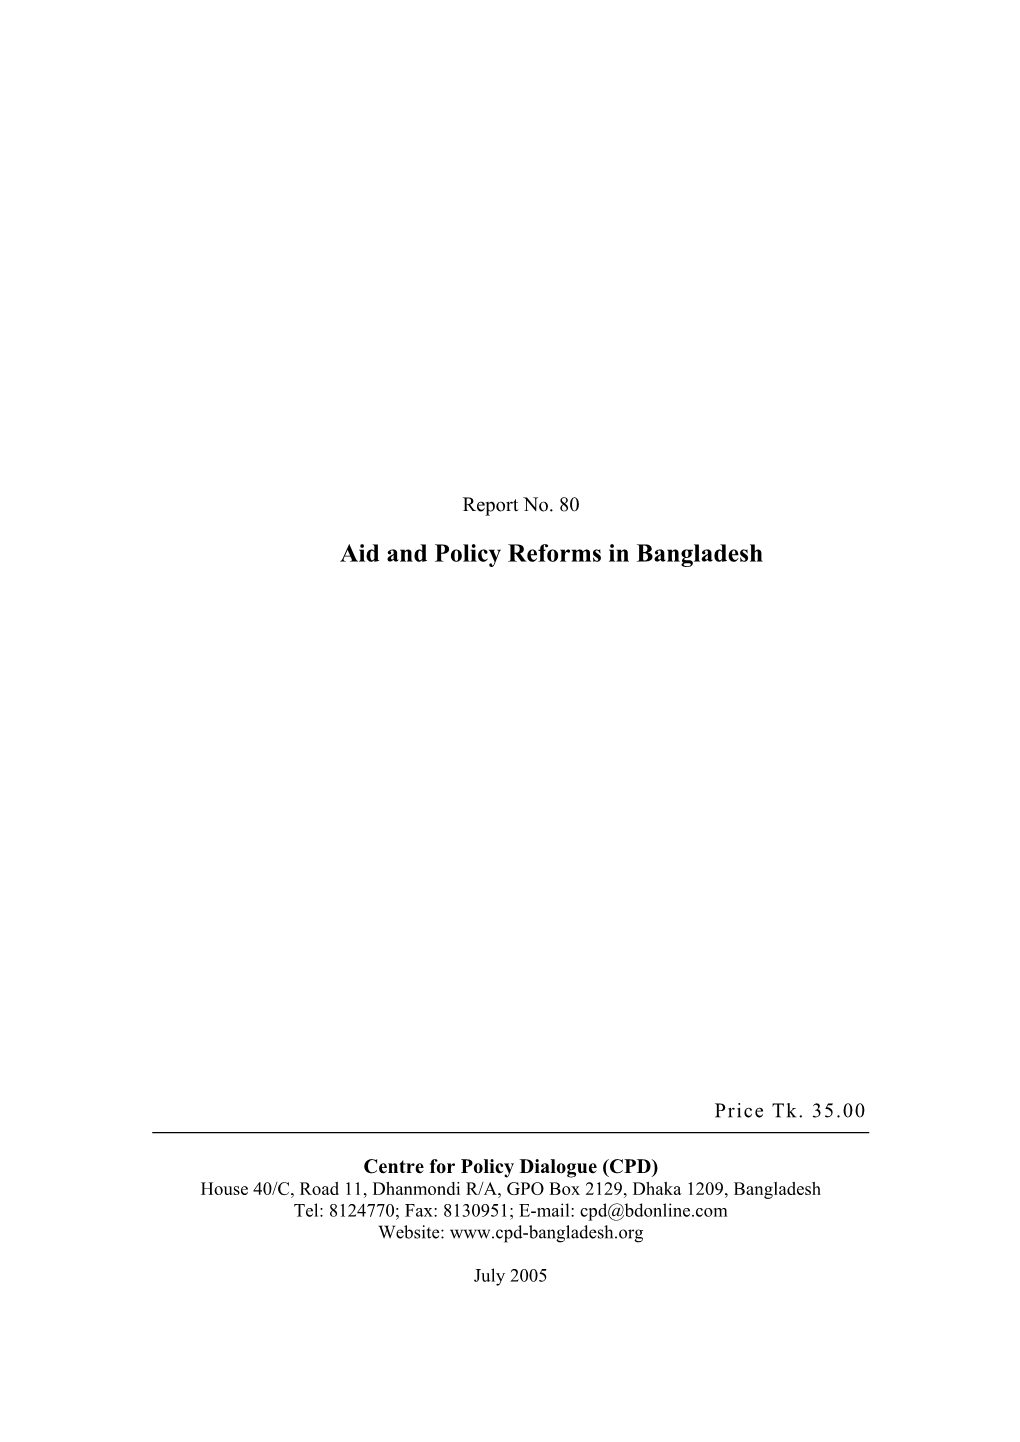 Aid and Policy Reforms in Bangladesh